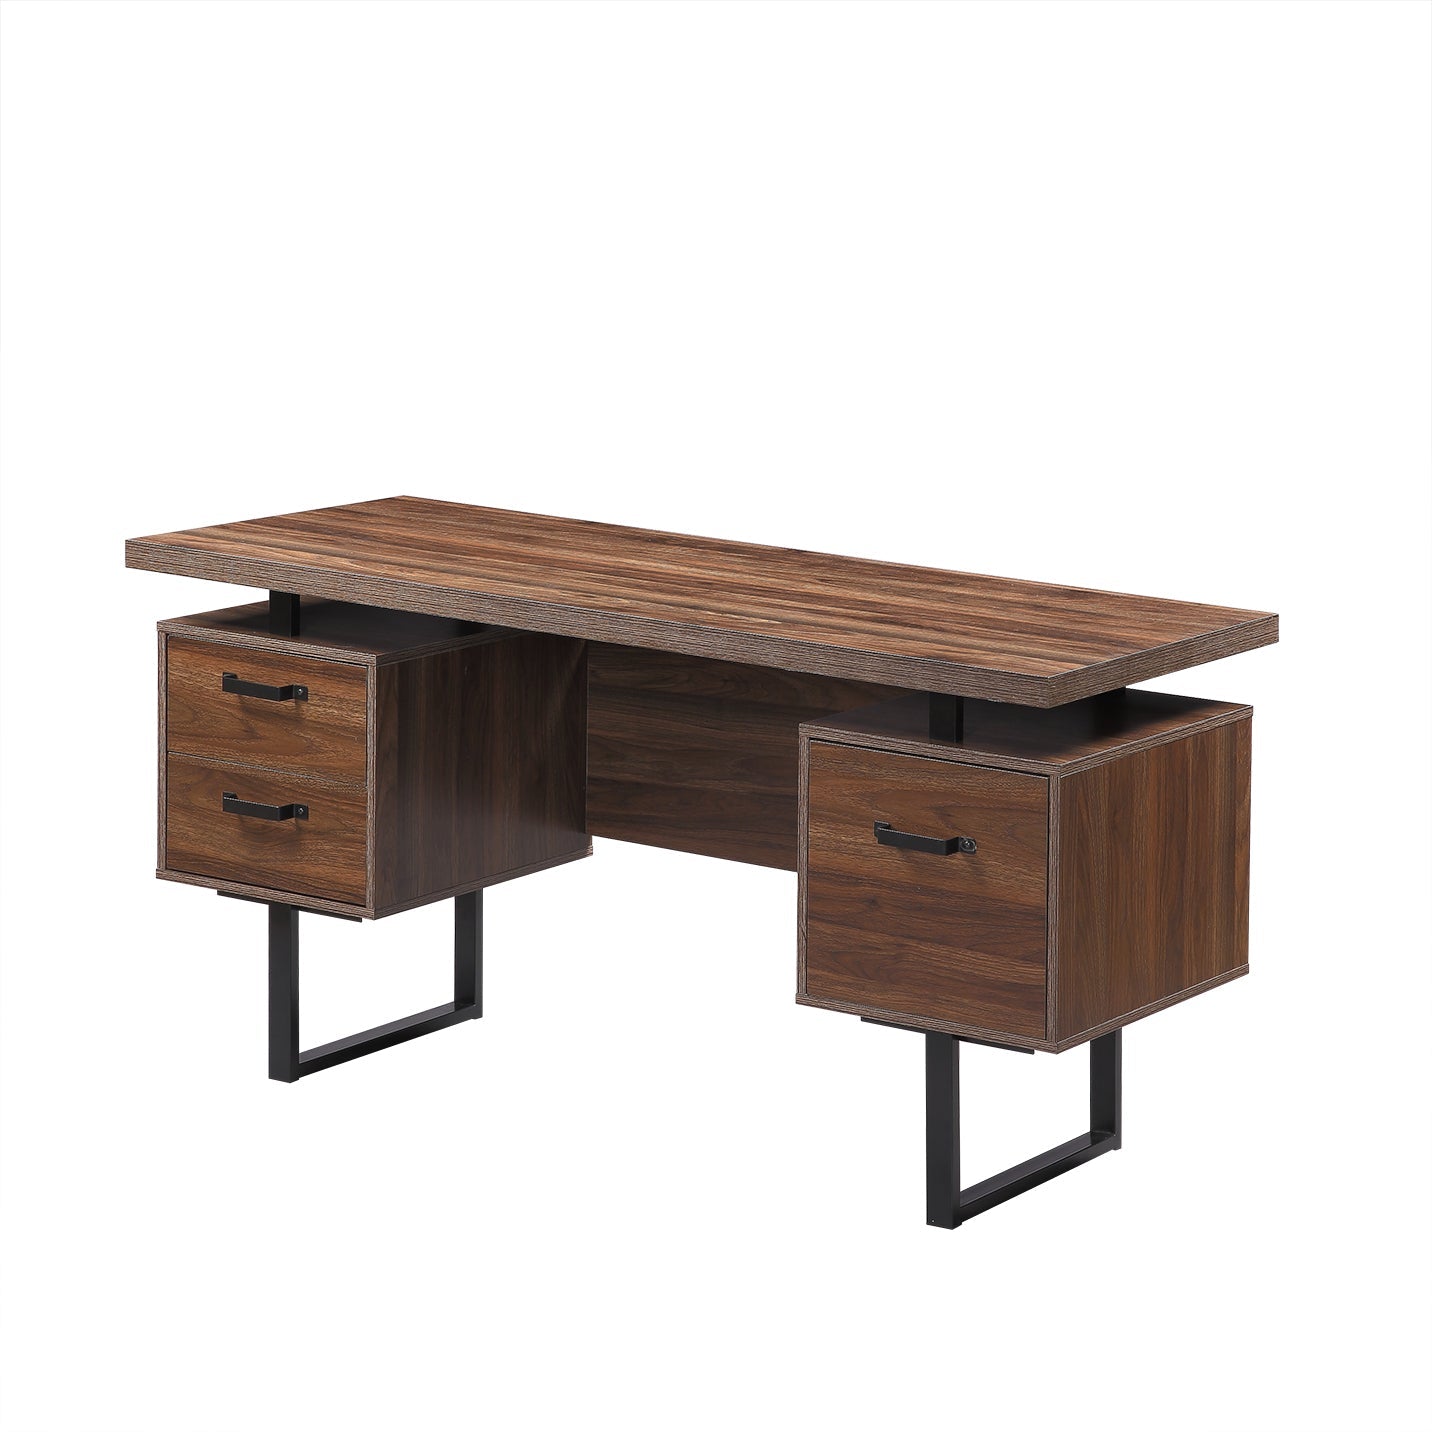 La Spezia Home Office Computer Desk with Drawers Hanging Letter-size Files 59 inch Writing Study Table with Drawers